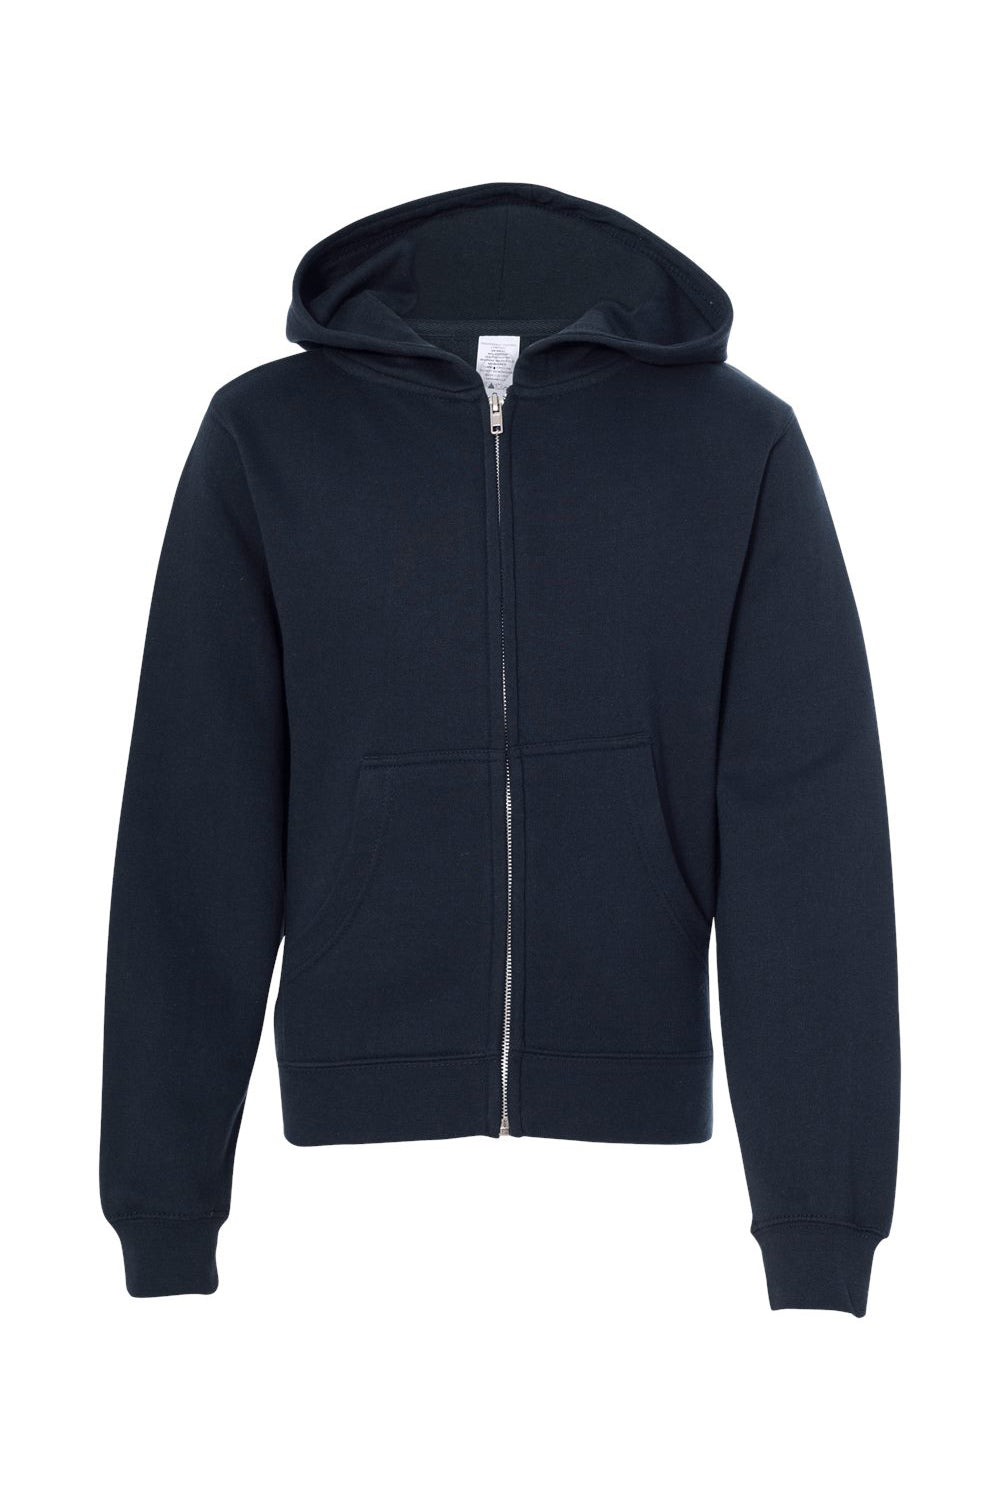 Independent Trading Co. SS4001YZ Youth Full Zip Hooded Sweatshirt Hoodie Navy Blue Flat Front